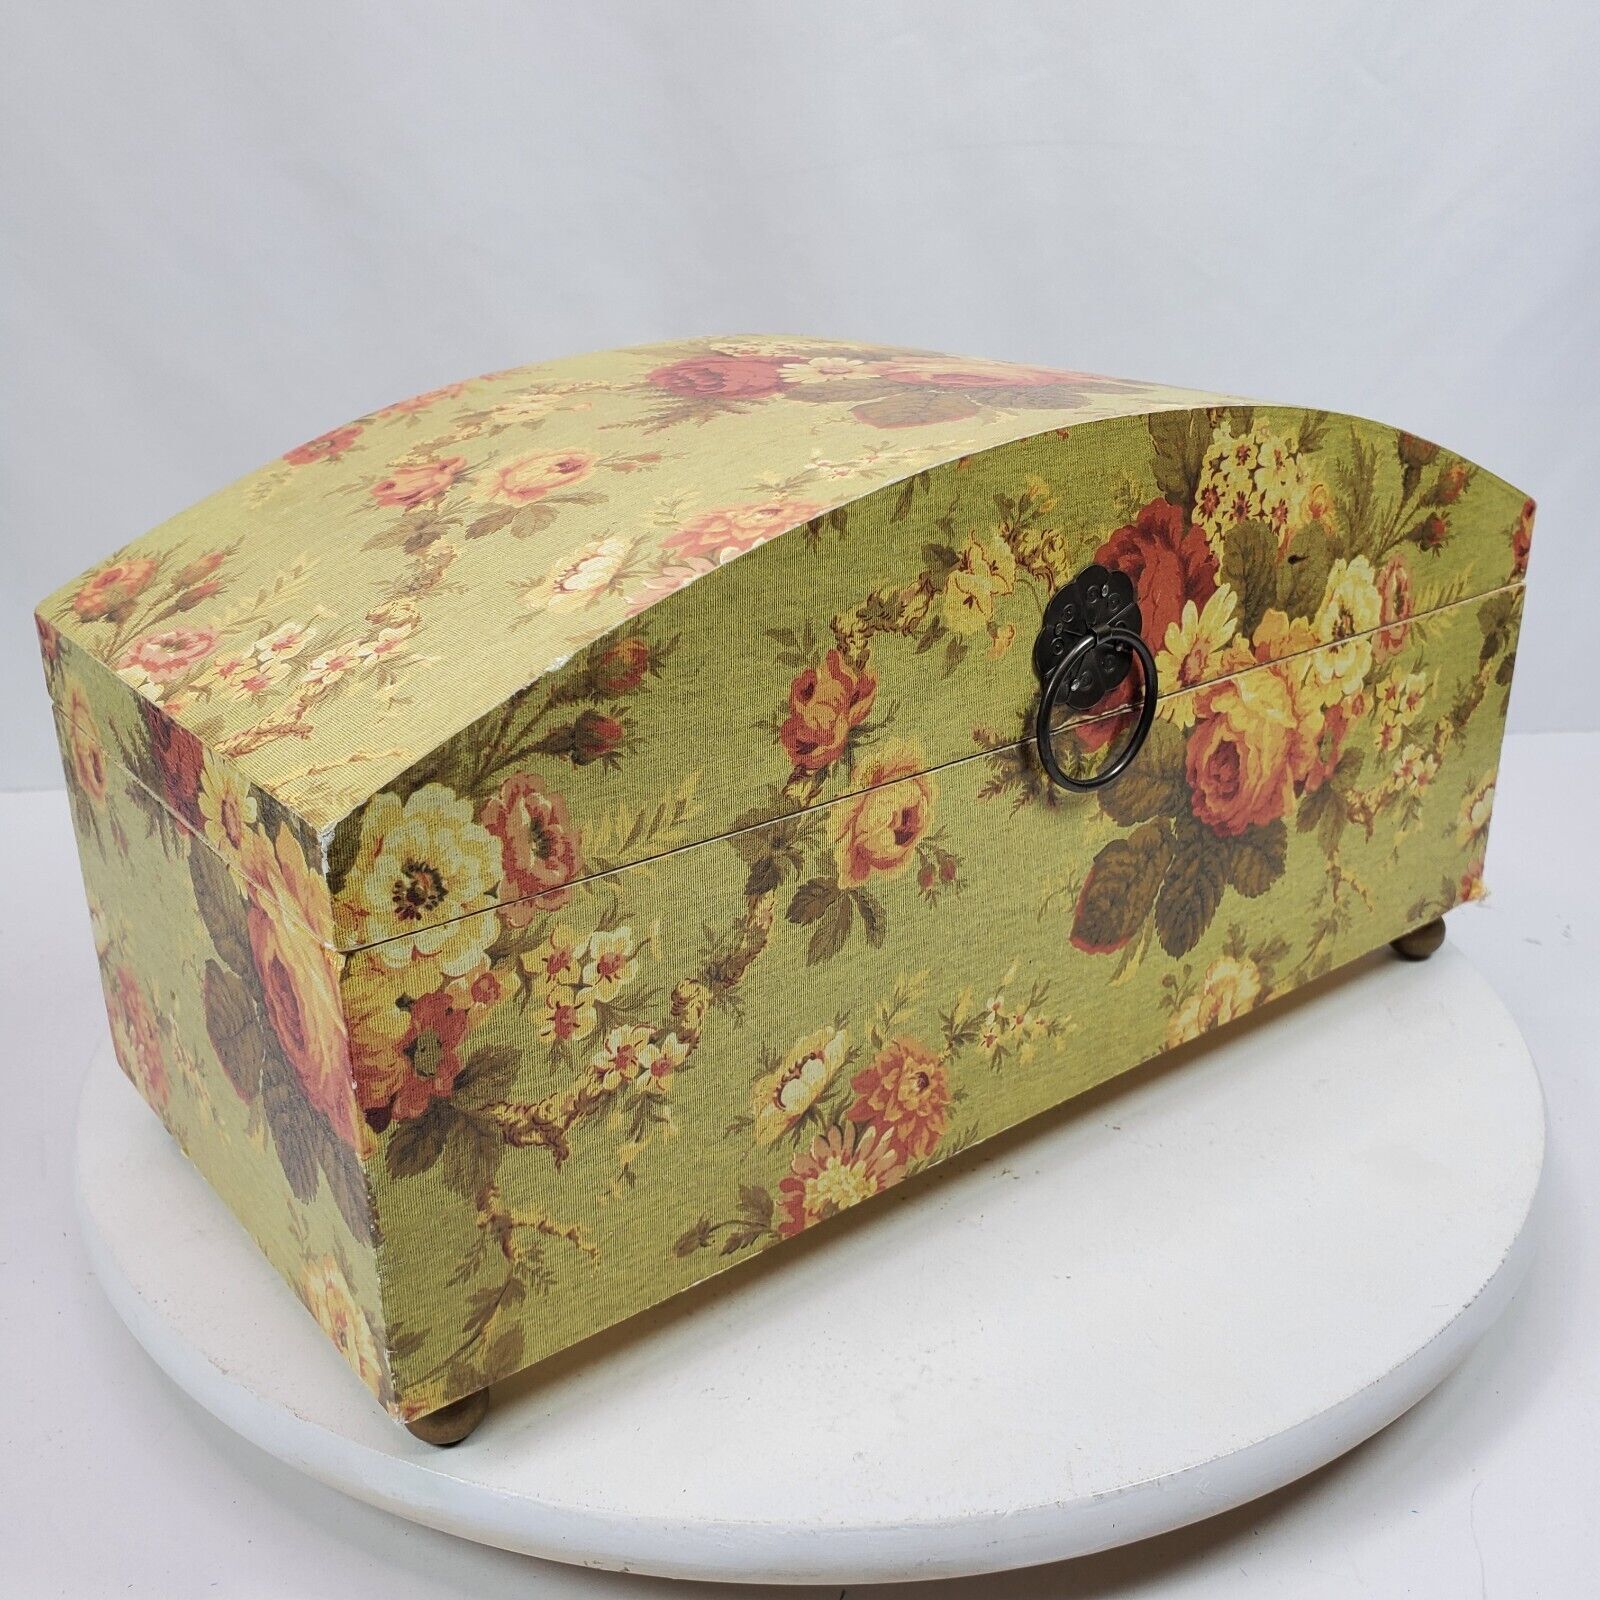 Vintage Victorian Floral Storage Box w/ Domed Lid 13x6x7 Inch